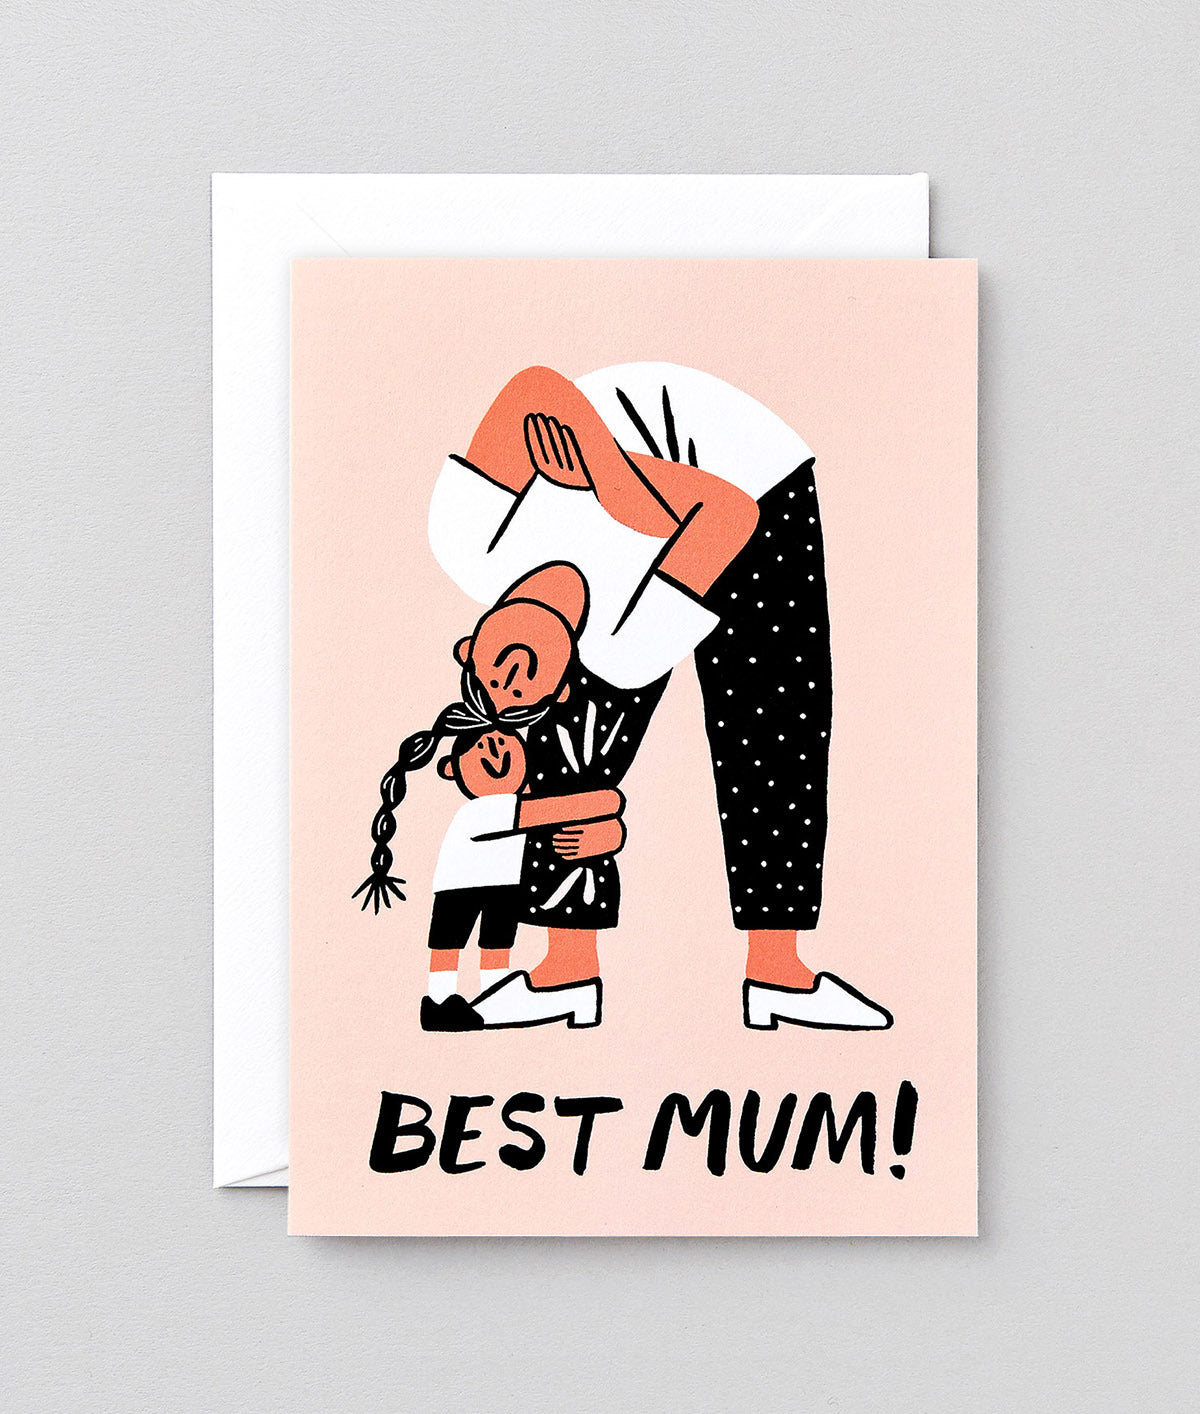 Best Mum! Mother's Day Card